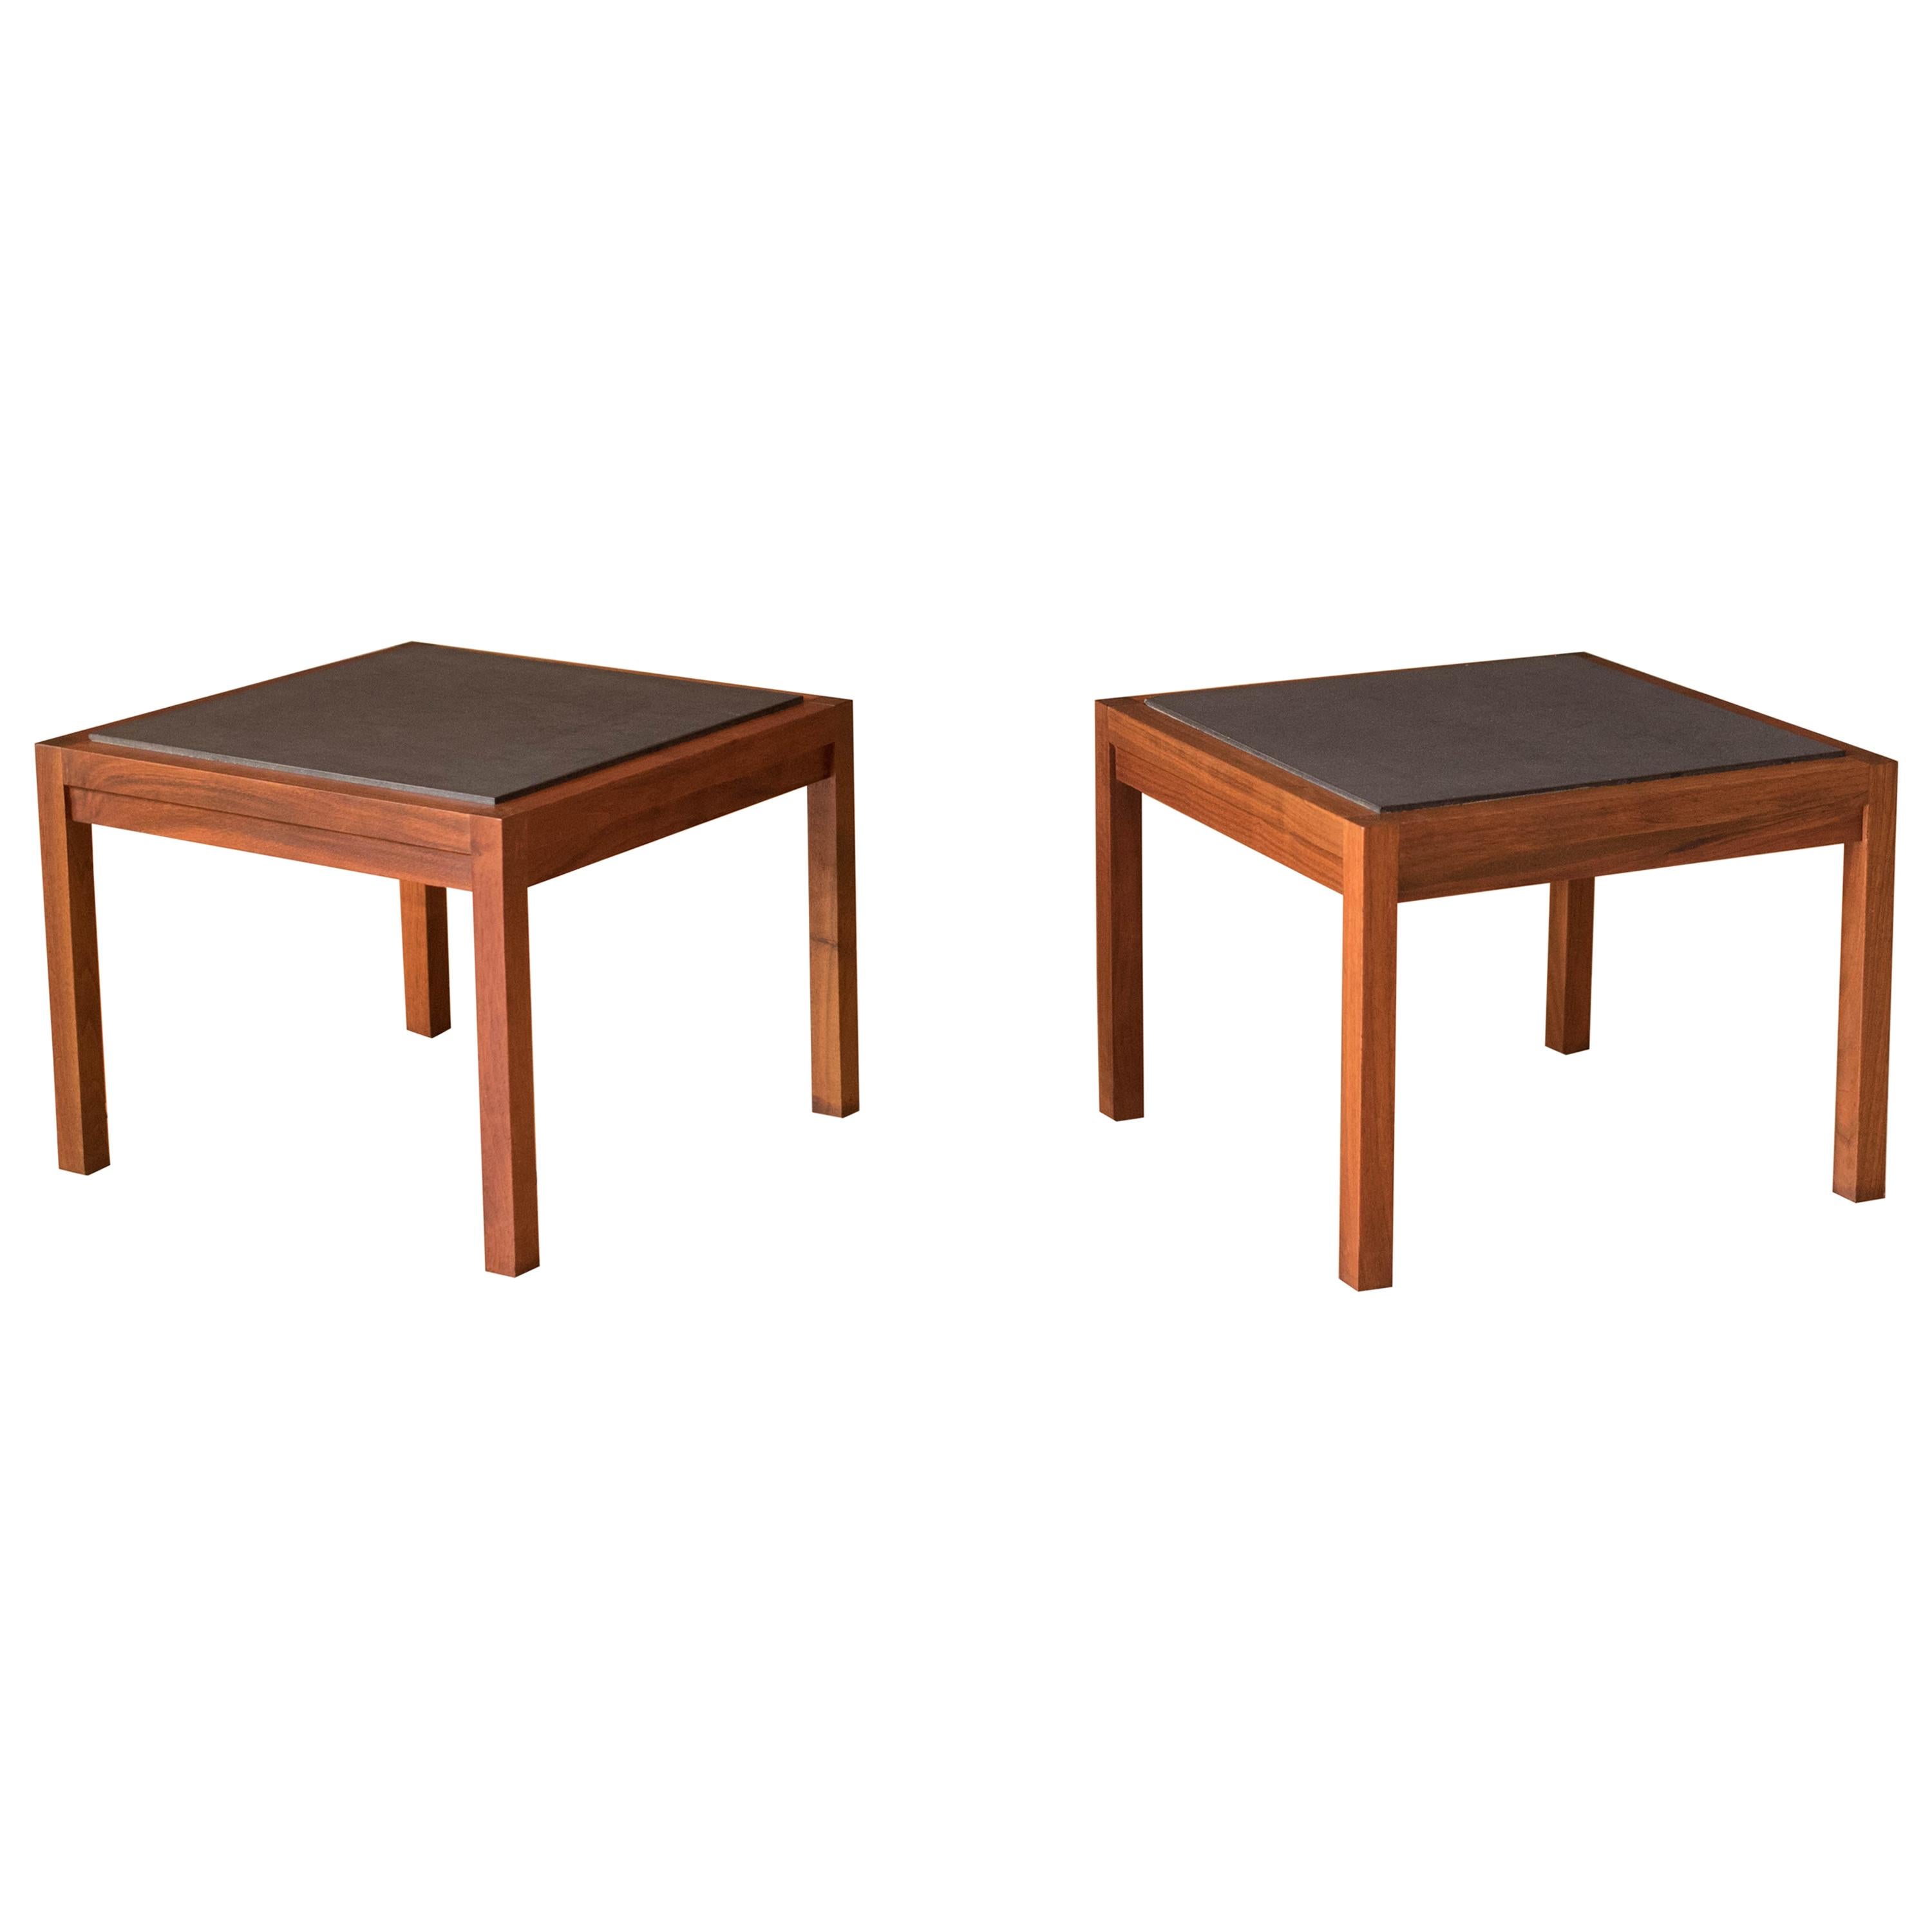 Pair of Mid Century Slate and Walnut End Tables by Jack Cartwright for Founders